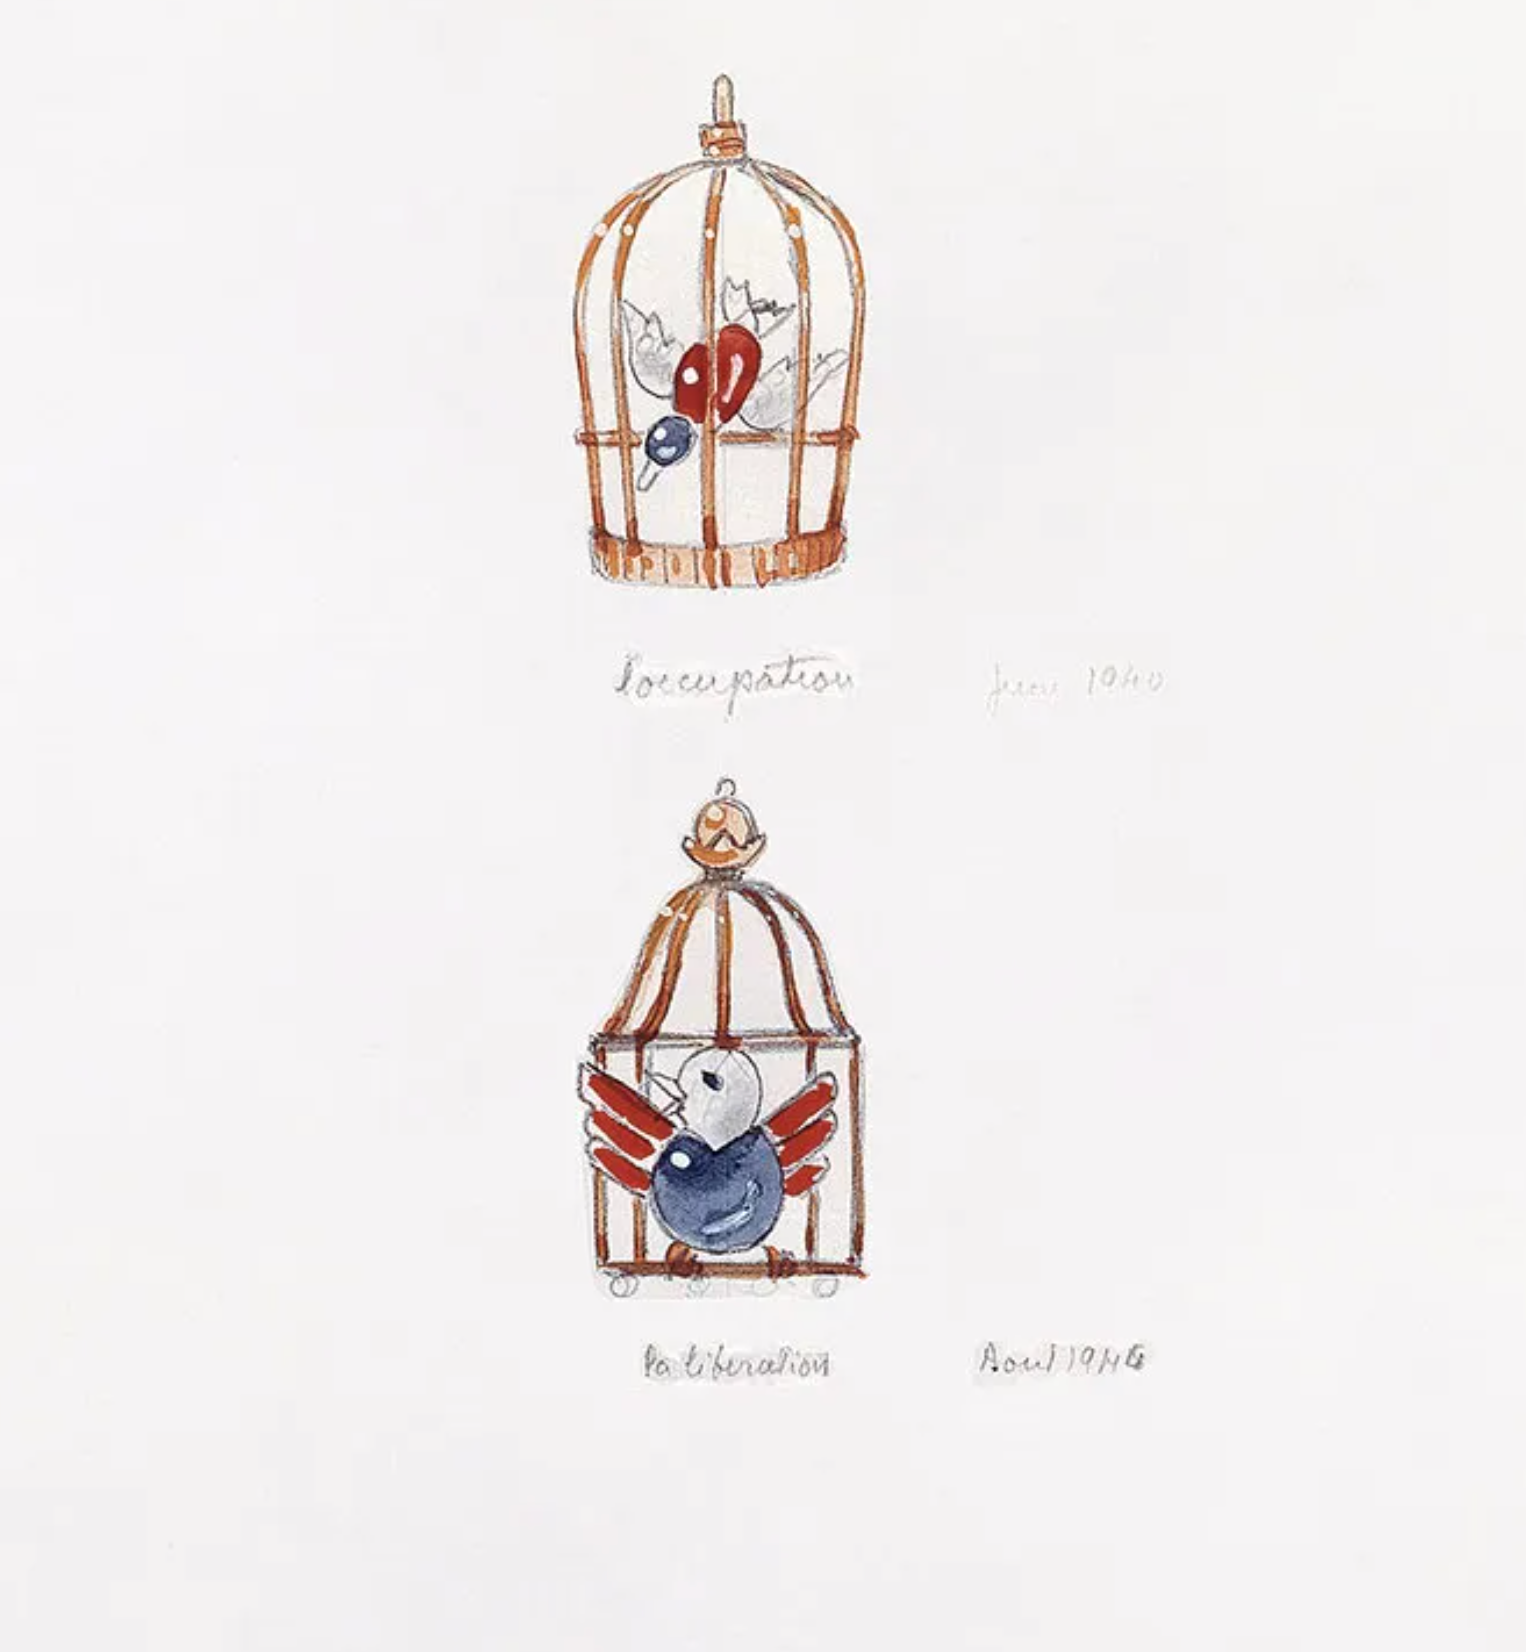 Cartier design of the caged and freed birds made during and after World War II. Cartier Archives.